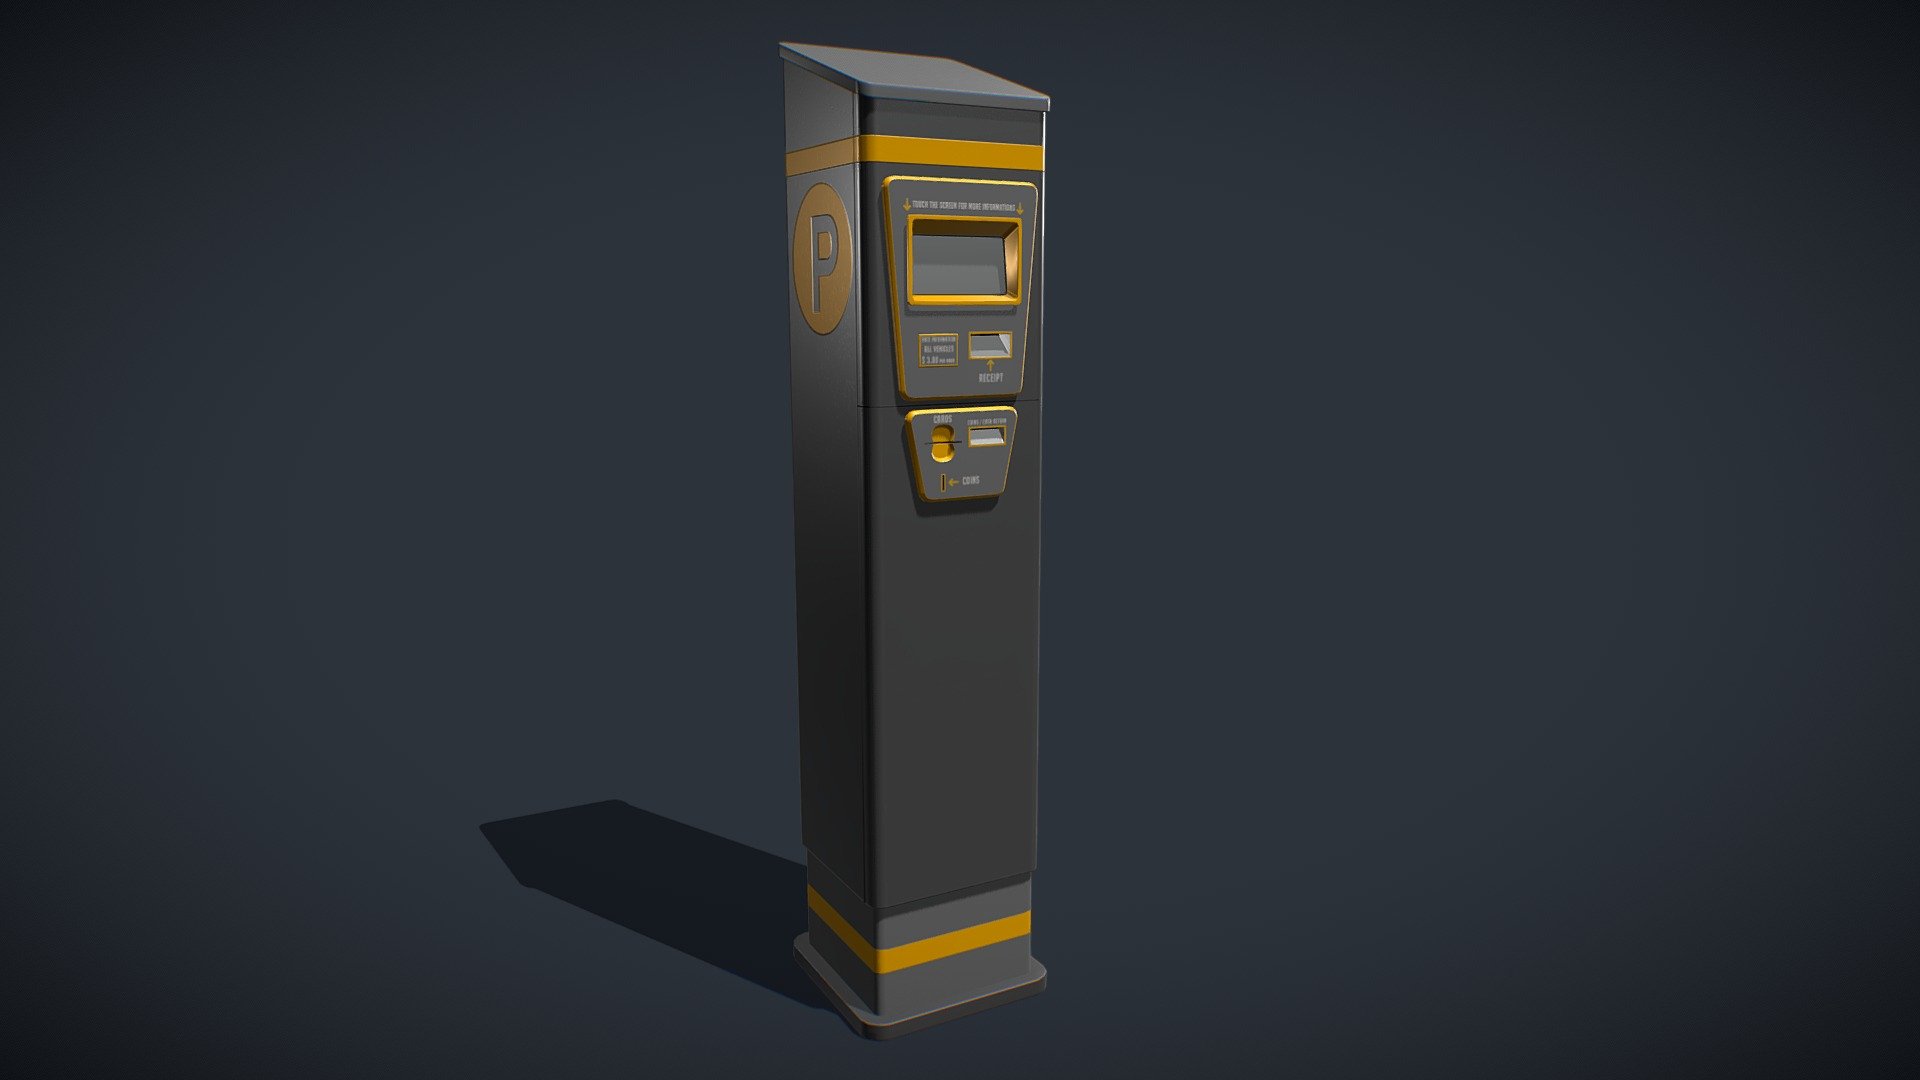 Stylized Parking Meter with Stylized PBR Textures. Suitable for any scene. Ready to use in any project.

Are you liked this model? Feel free to take a look on my another models! Here

Features:

.Fbx, .Obj, .Uasset and .Blend files.

Low Poly Mesh game-ready.

Real-World Scale (centimeters).

Unreal Project: 4.18+

Custom Collision for Unreal Engine 4 (Handmade).

Tris Count: 961.

Number of Textures:5

Number of Textures (UE4): 3

PBR Textures (2048x2048) (PNG).

Type of Textures: Base Color, Roughness, Metallic, Normal Map and Ambient Occlusion (PNG)

Combined RMA texture (Roughness, Metallic and Ambient Occlusion) for Unreal Engine (PNG) 3d model